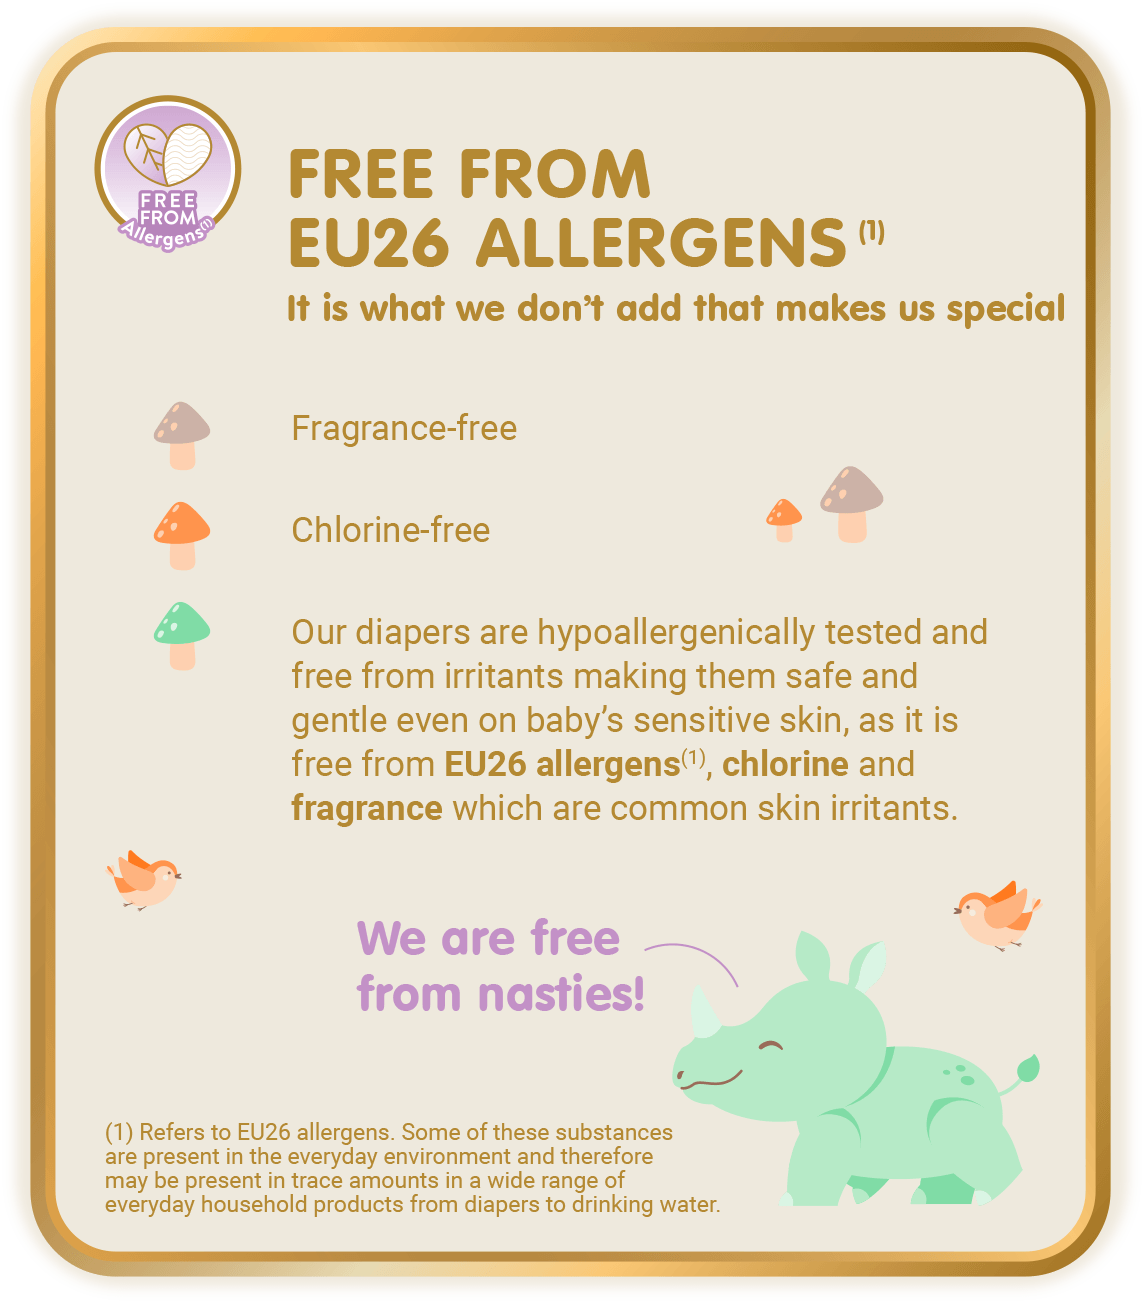 Free From Allergens (1) - Free from EU26 Allergens (1), It is what we don’t add that makes us special: Fragrance-free, Chlorine-free, Our diapers are hypoallergenically tested and free from irritants making them safe and gentle even on baby’s sensitive skin, as it is free from EU26 allergens(1), chlorine and fragrance which are common skin irritants. [(1) Refers to EU26 allergens. Some of these substances are present in the everyday environment and therefore may be present in trace amounts in a wide range of everyday household products from diapers to drinking water.]